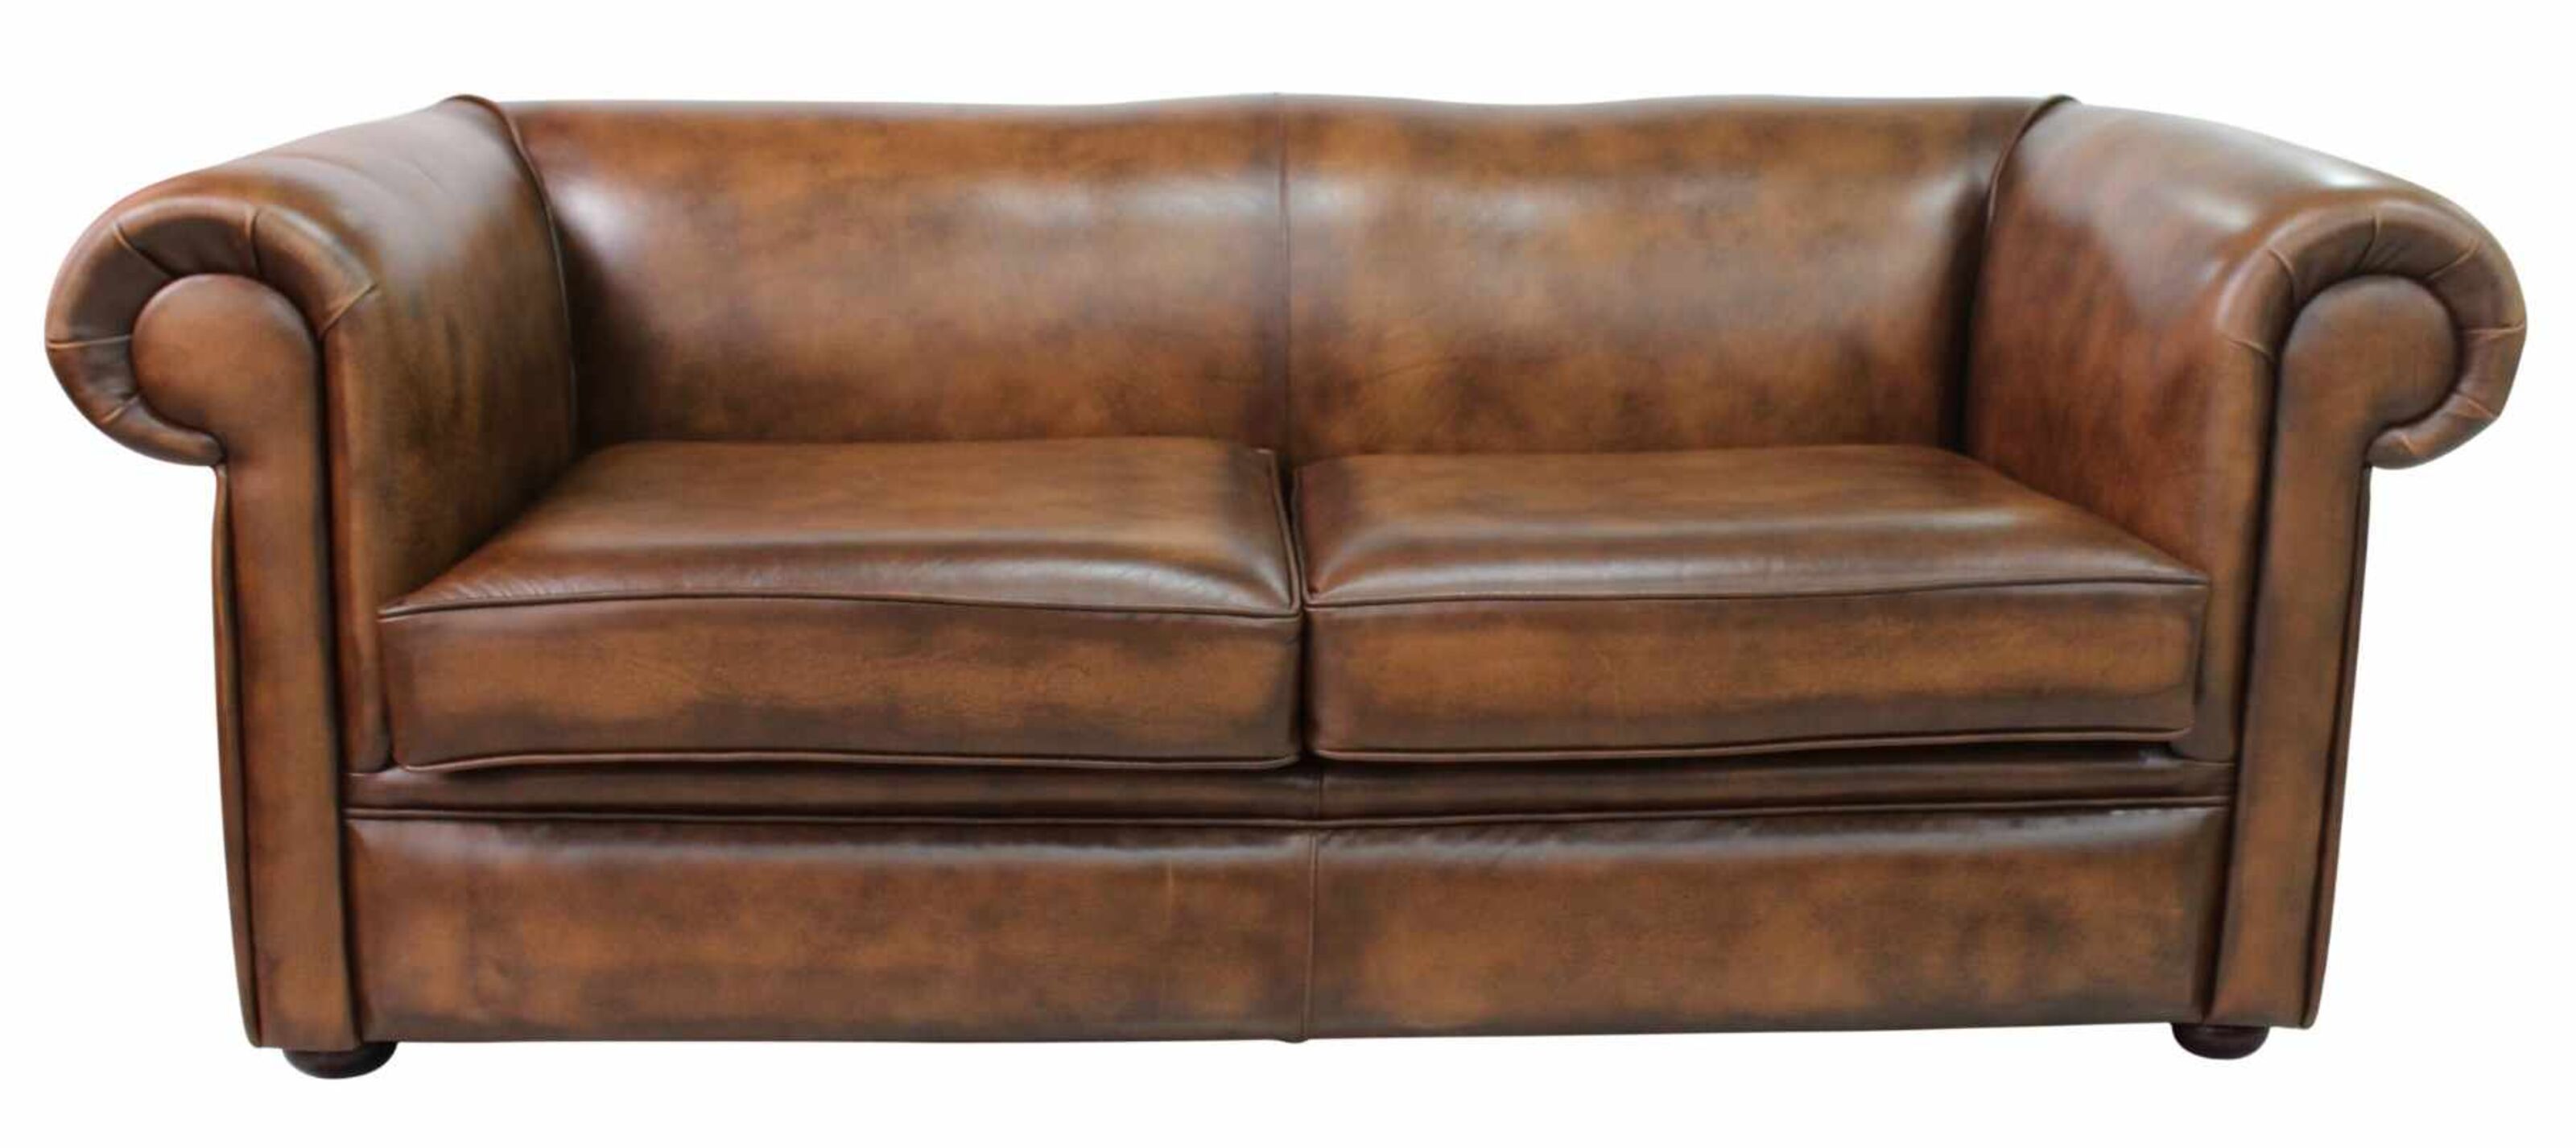 From Tradition to Treasure The Crafting of Chesterfield Sofas in Their Birthplace  %Post Title